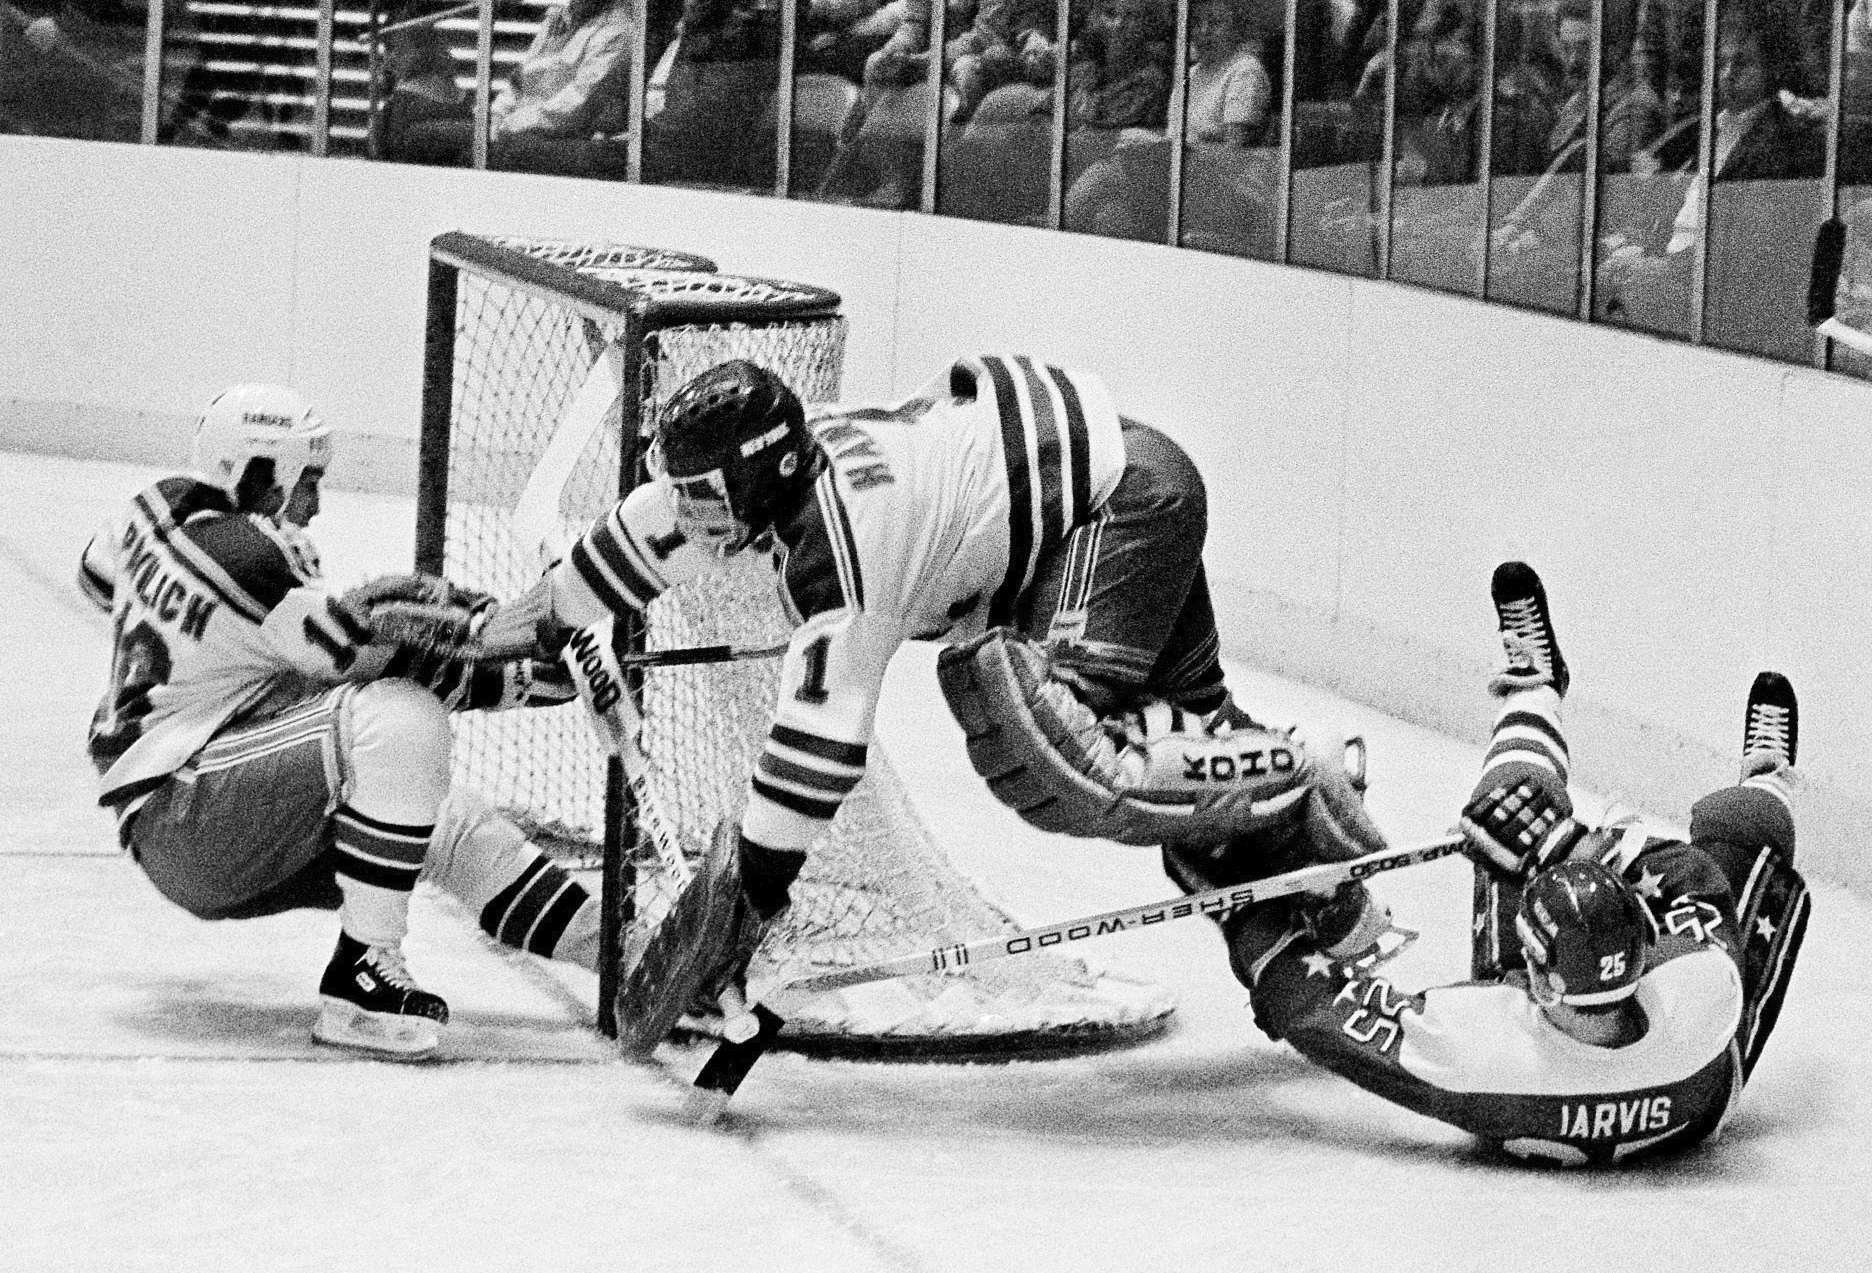 AP Was There: An Olympic 'Miracle On Ice' as US shocks USSR